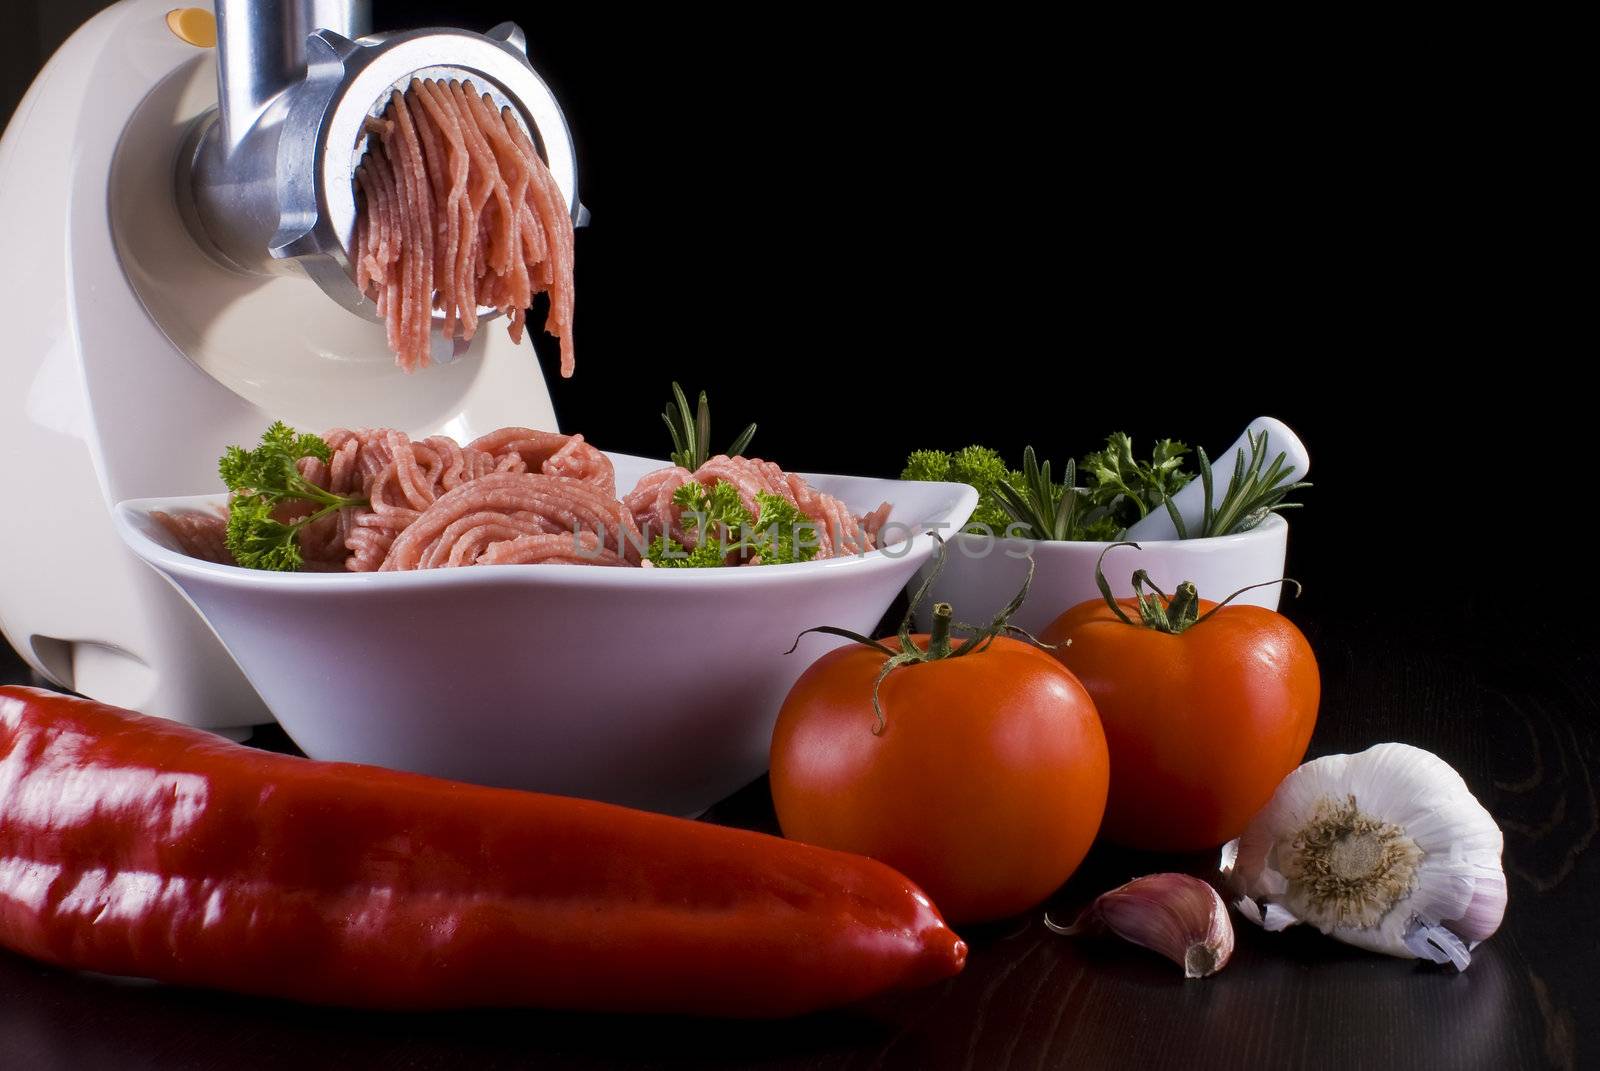 Meat grinder with mince and vegetables by caldix